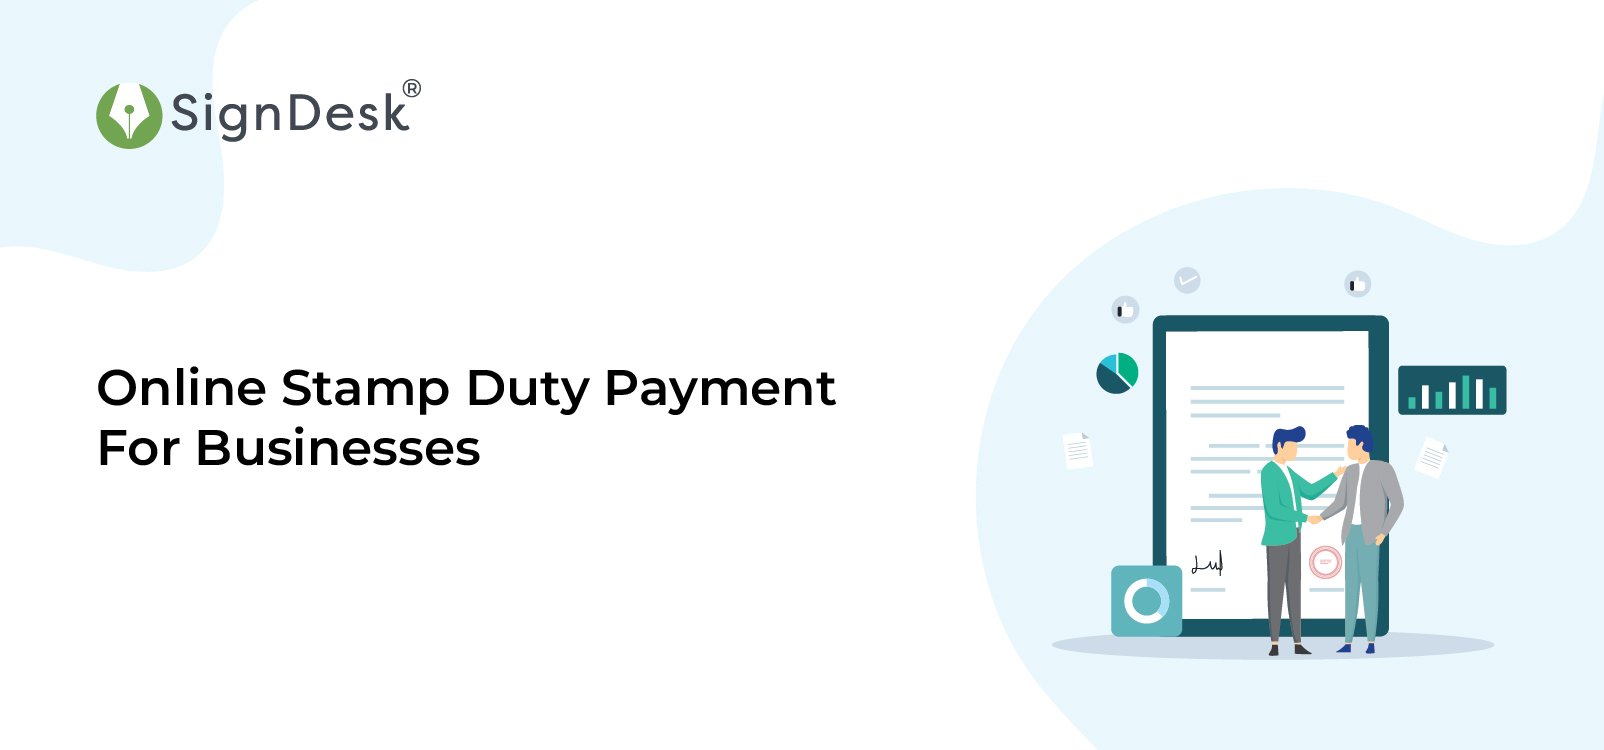 Online Stamp Duty Payment  The Best Way To Stamp Documents